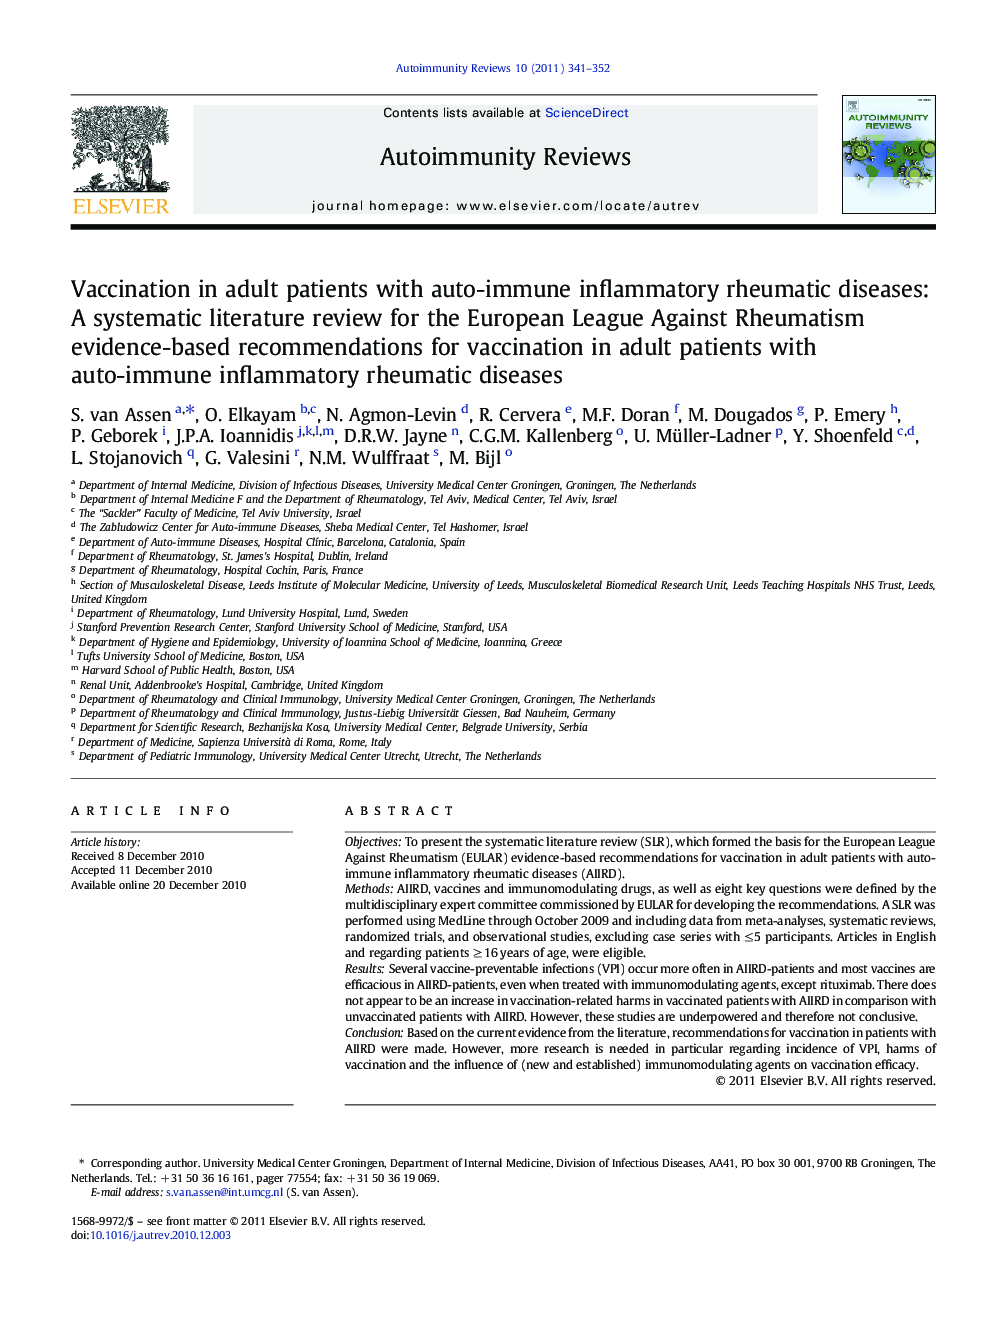 Vaccination in adult patients with auto-immune inflammatory rheumatic diseases: A systematic literature review for the European League Against Rheumatism evidence-based recommendations for vaccination in adult patients with auto-immune inflammatory rheuma